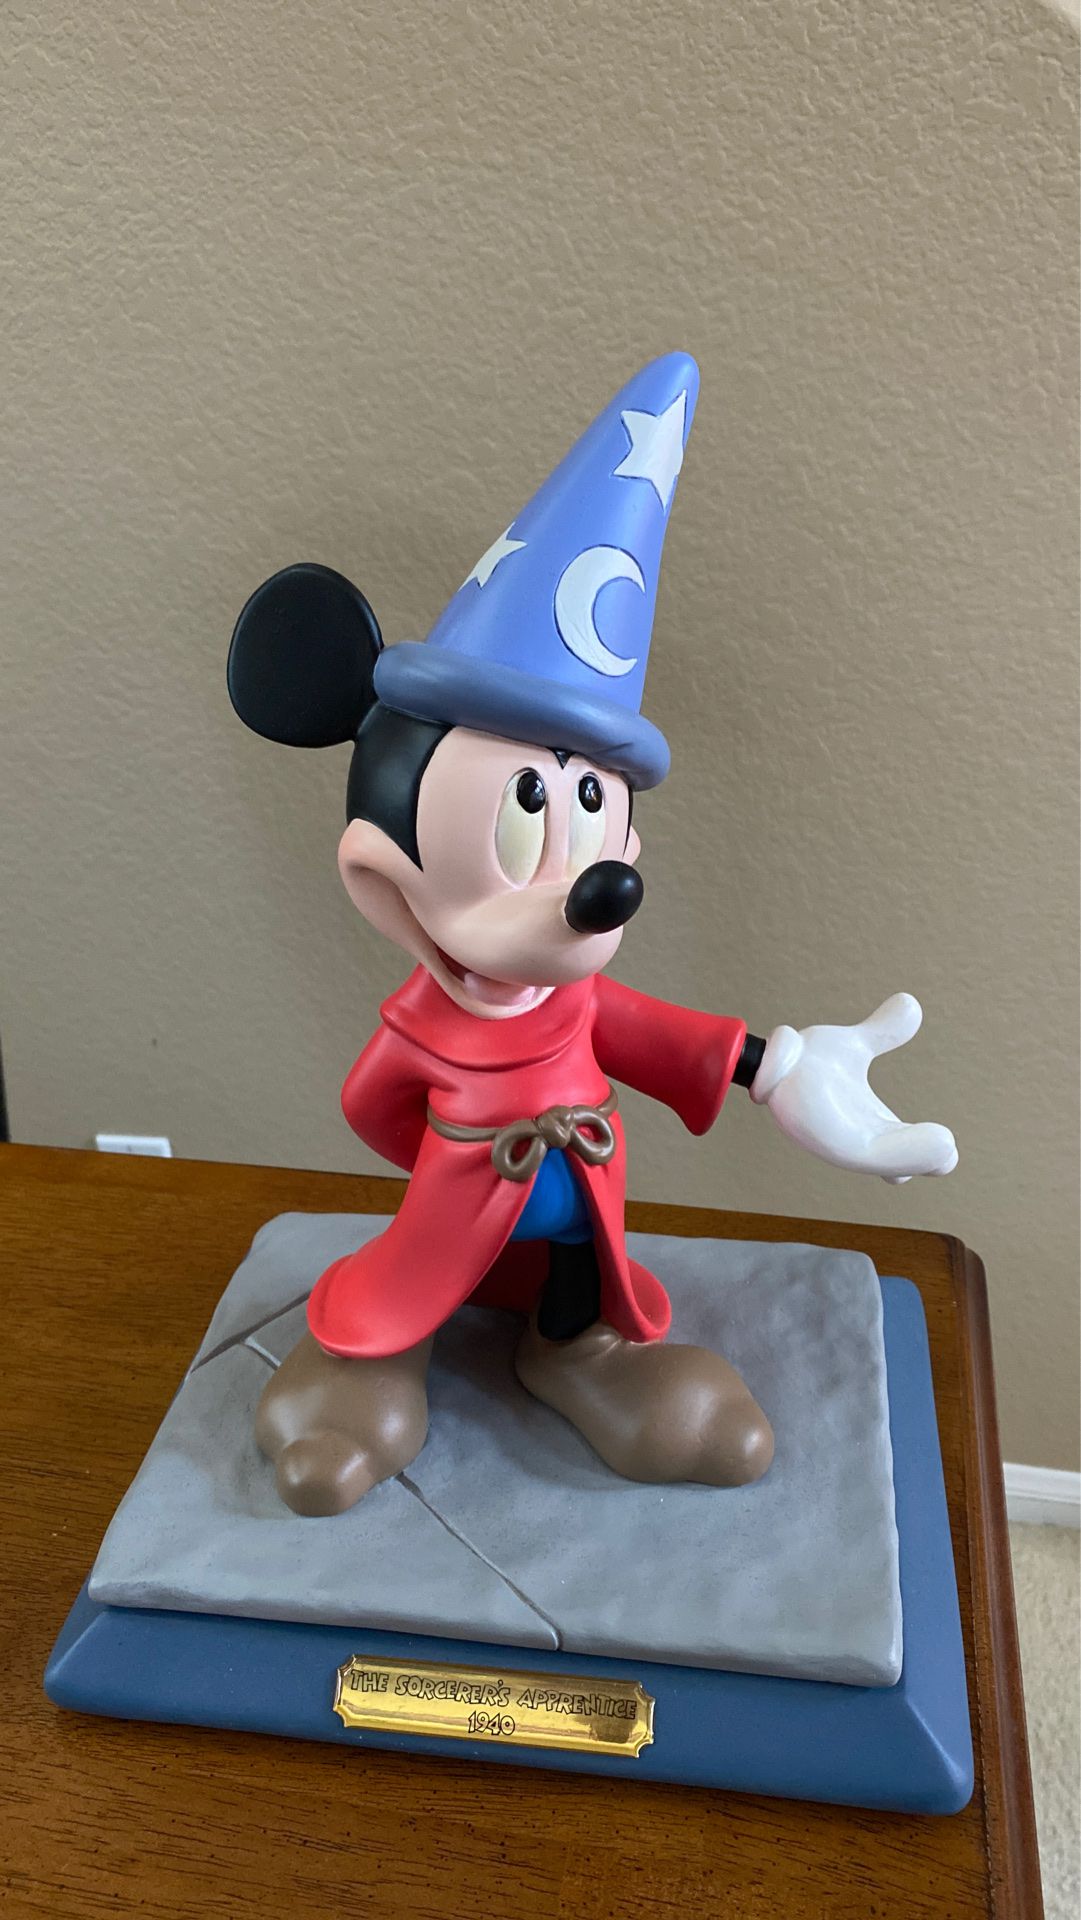 1994 official Disneyana convention Walt Disney World Resort Mickey Mouse Sorcerer’s apprentice by Marc Delle resin statue figurine limited edition of